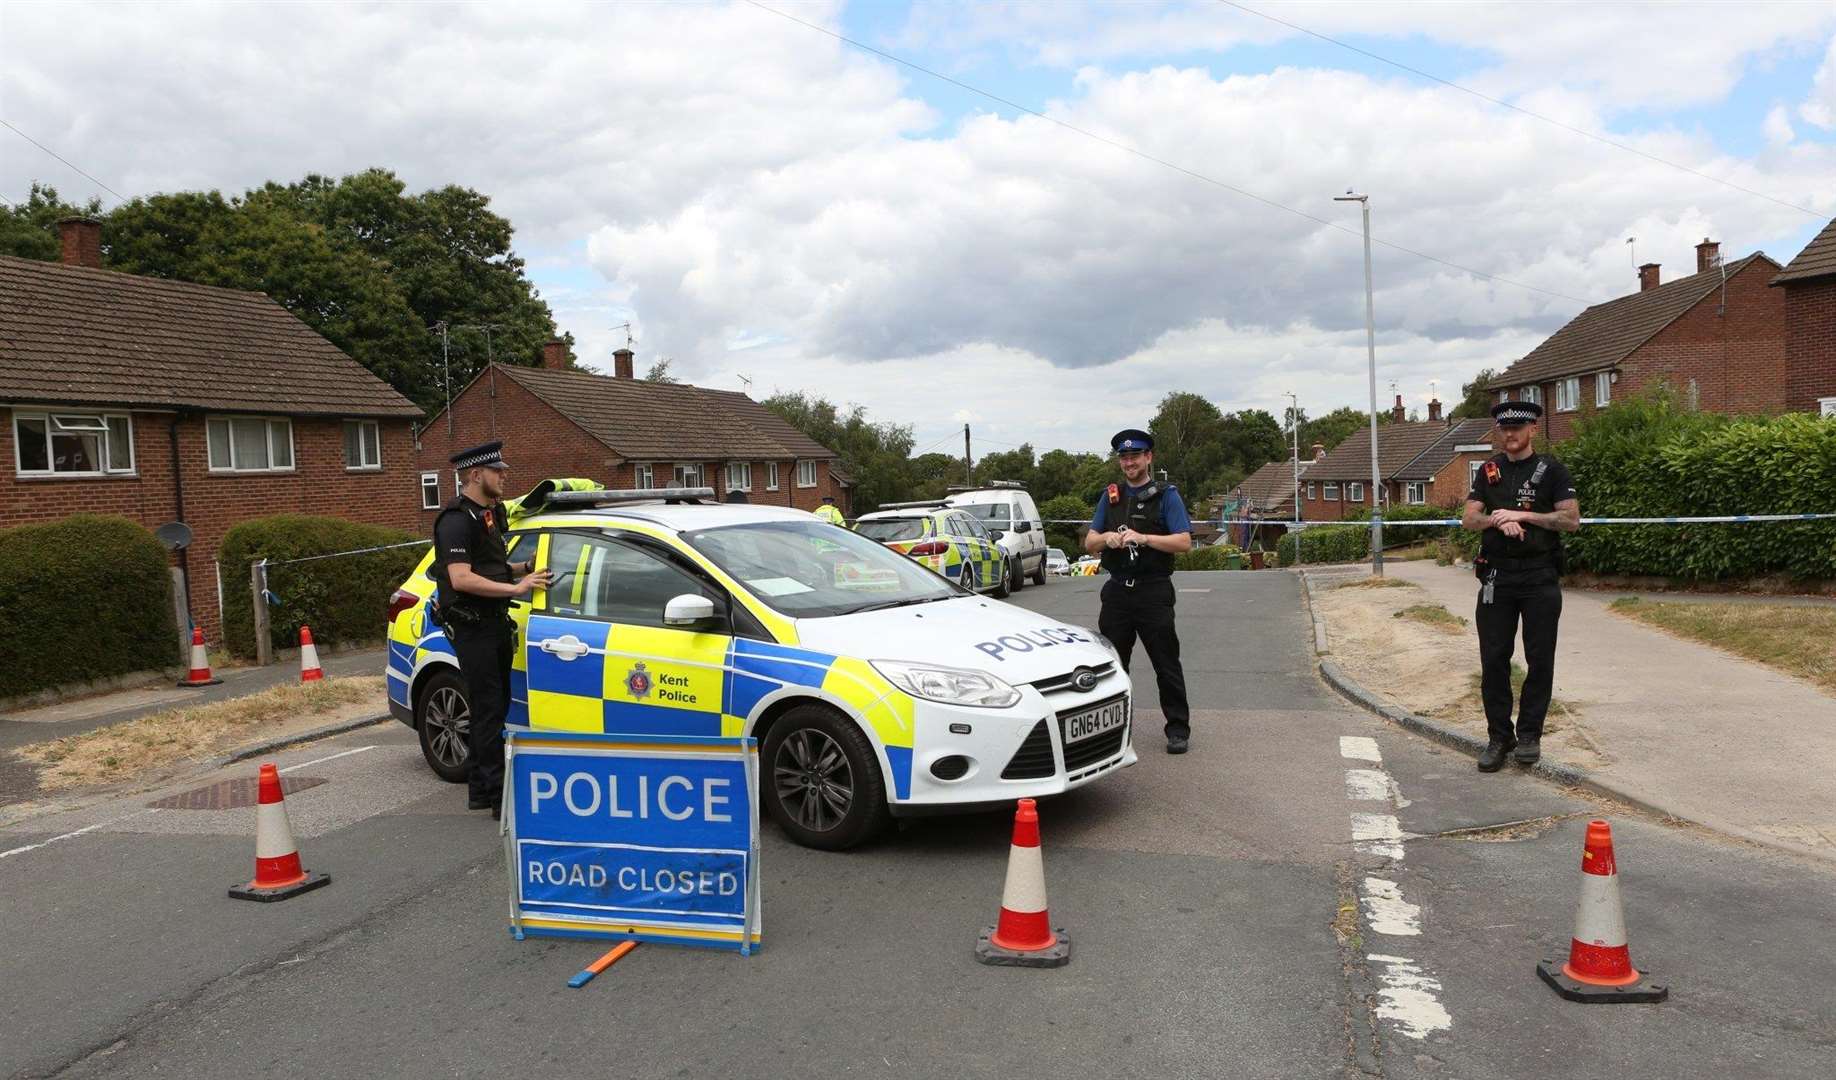 Police have closed the road. Image: UK News in Pictures